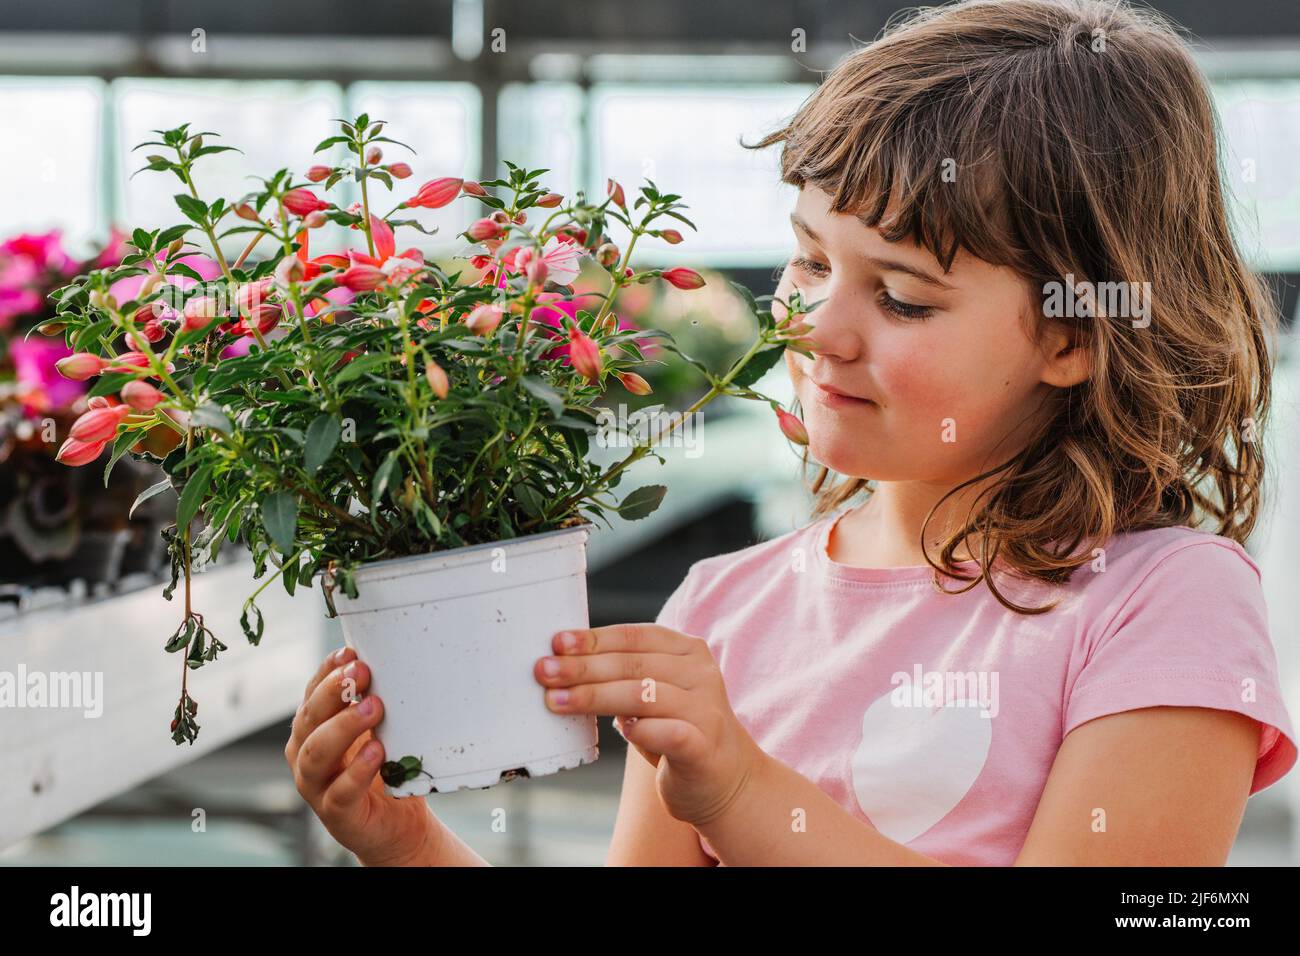 Cheerful cute child with dark hair smiling and holding metal pot with blooming plant in flower shop Stock Photo